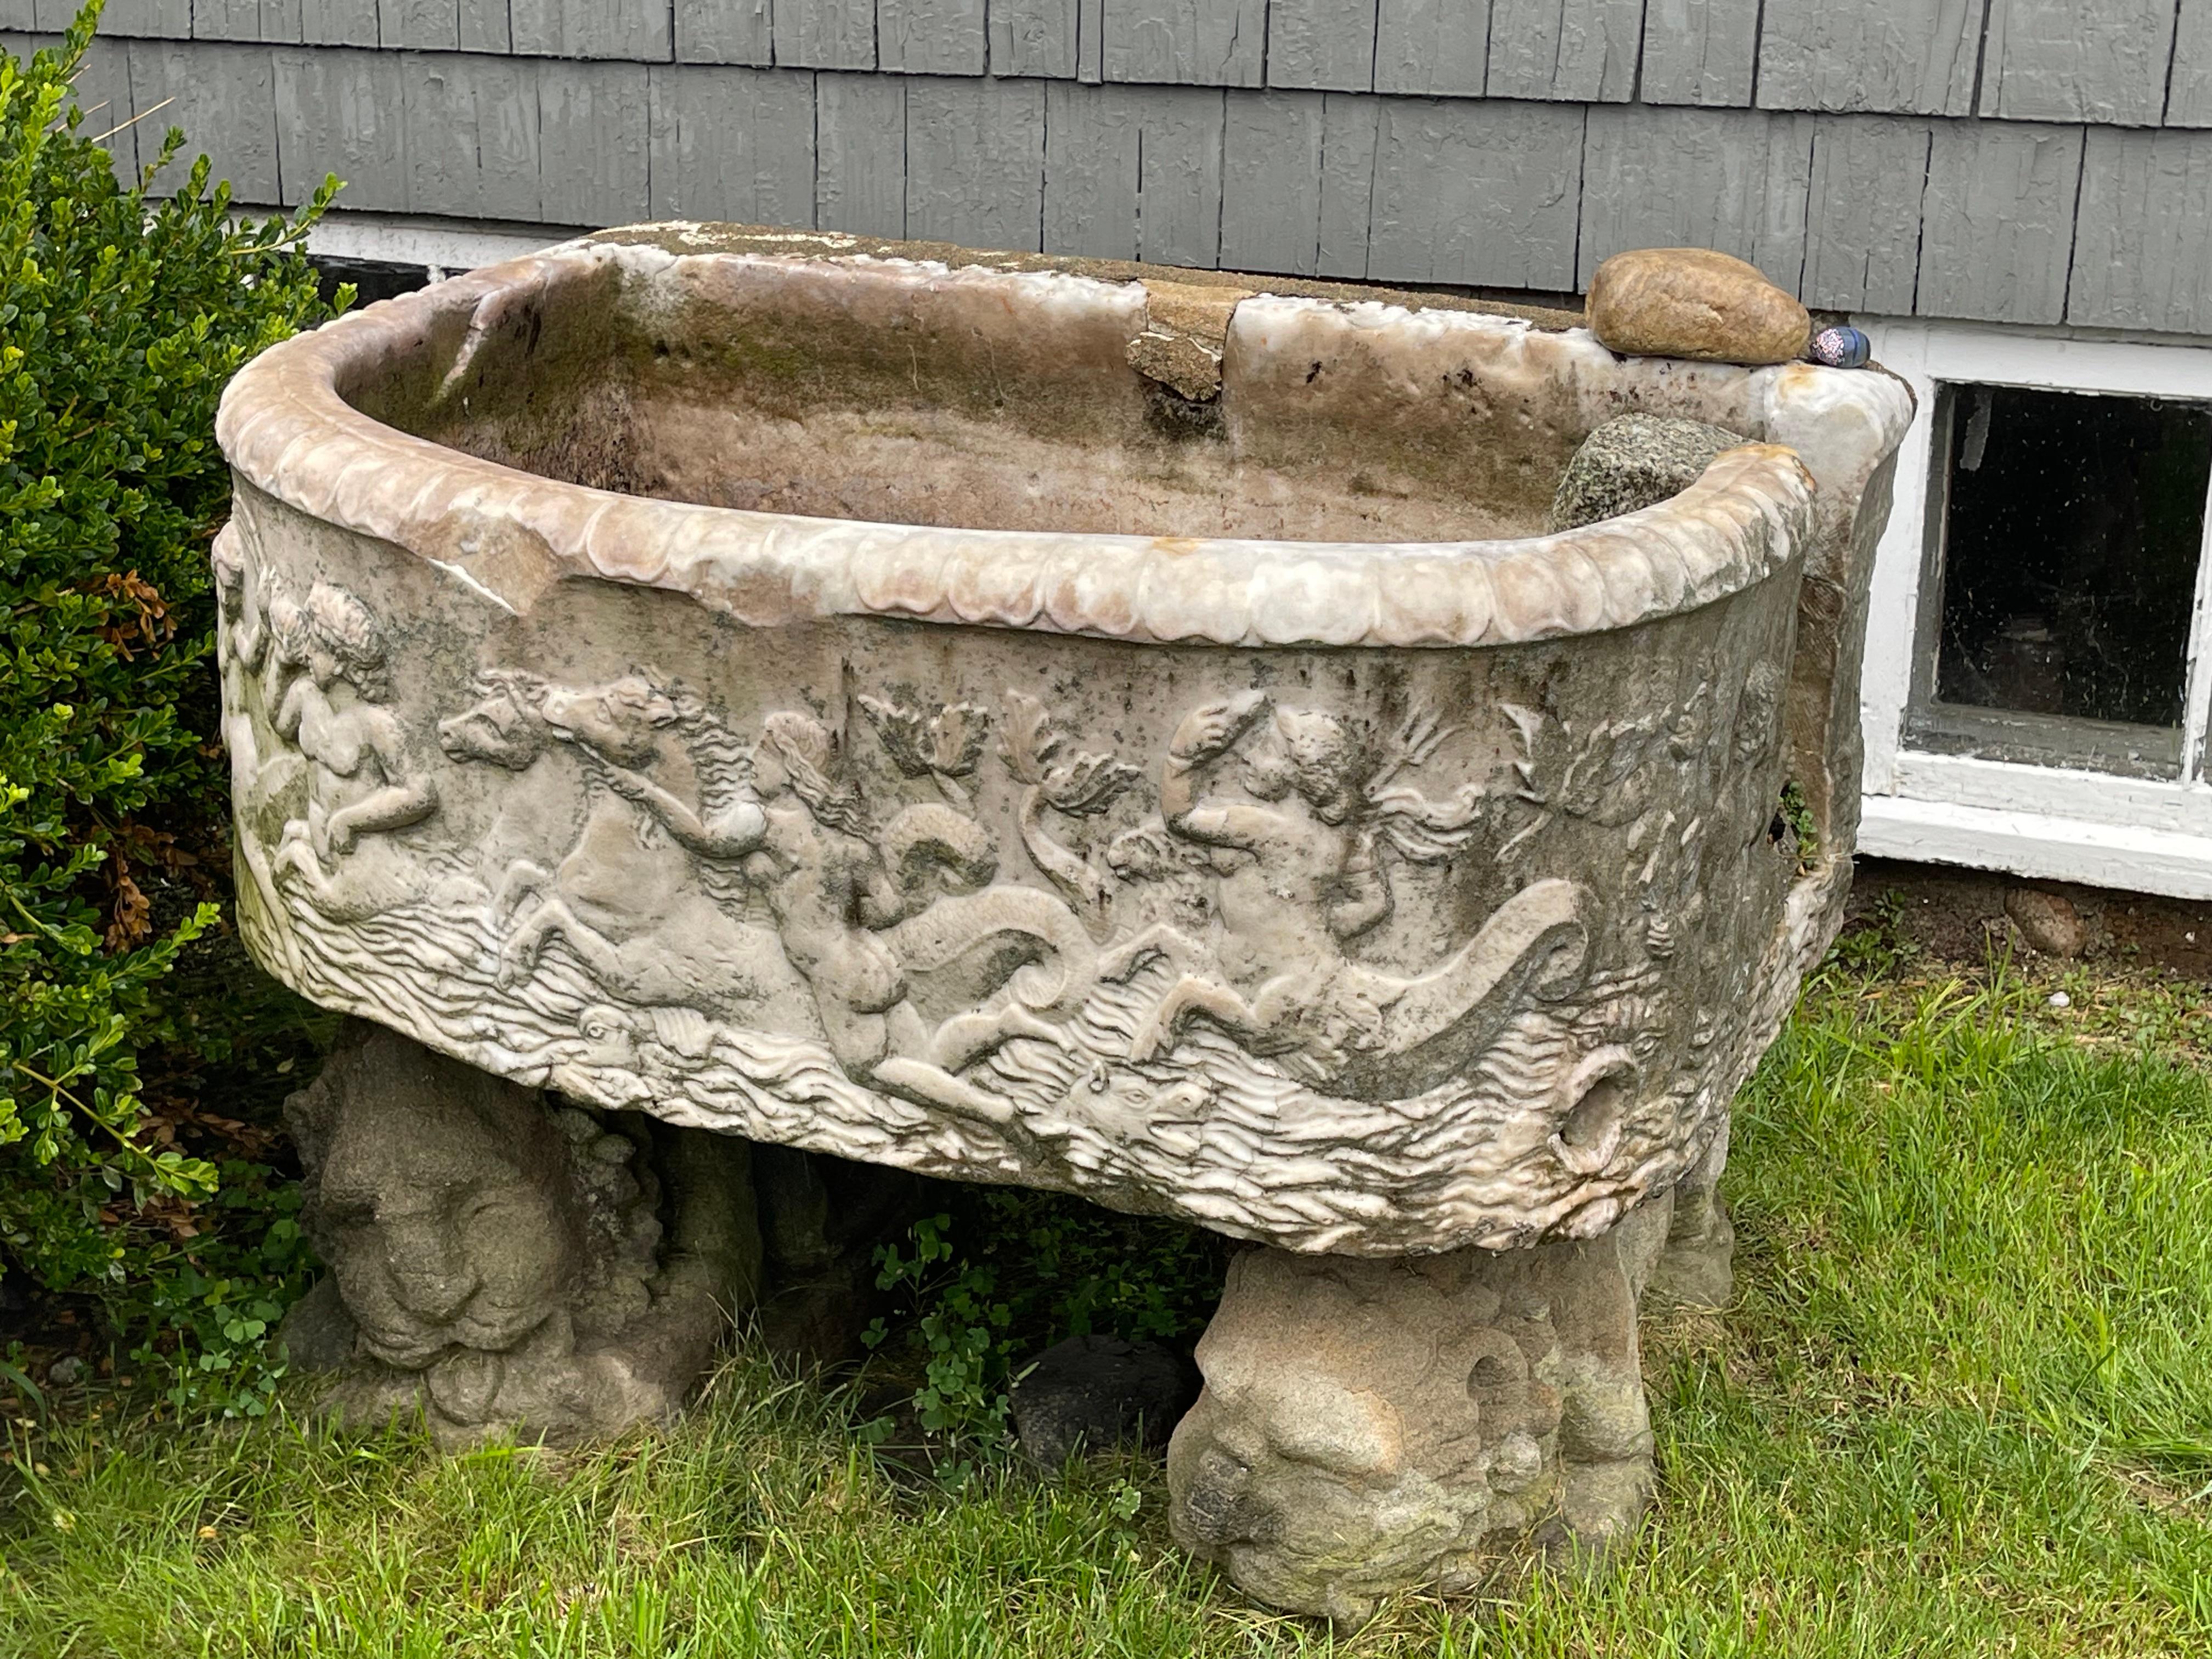 Large Carved Roman Marble Cistern from Carcassonne Castle in Marblehead, MA.  Carved Classical Scene of Sea Centaurs, Hippocamps and Water Gods and Goddesses.
An open mouthed dolphin once allowed water to escape from one side.  

Carcassonne Castle